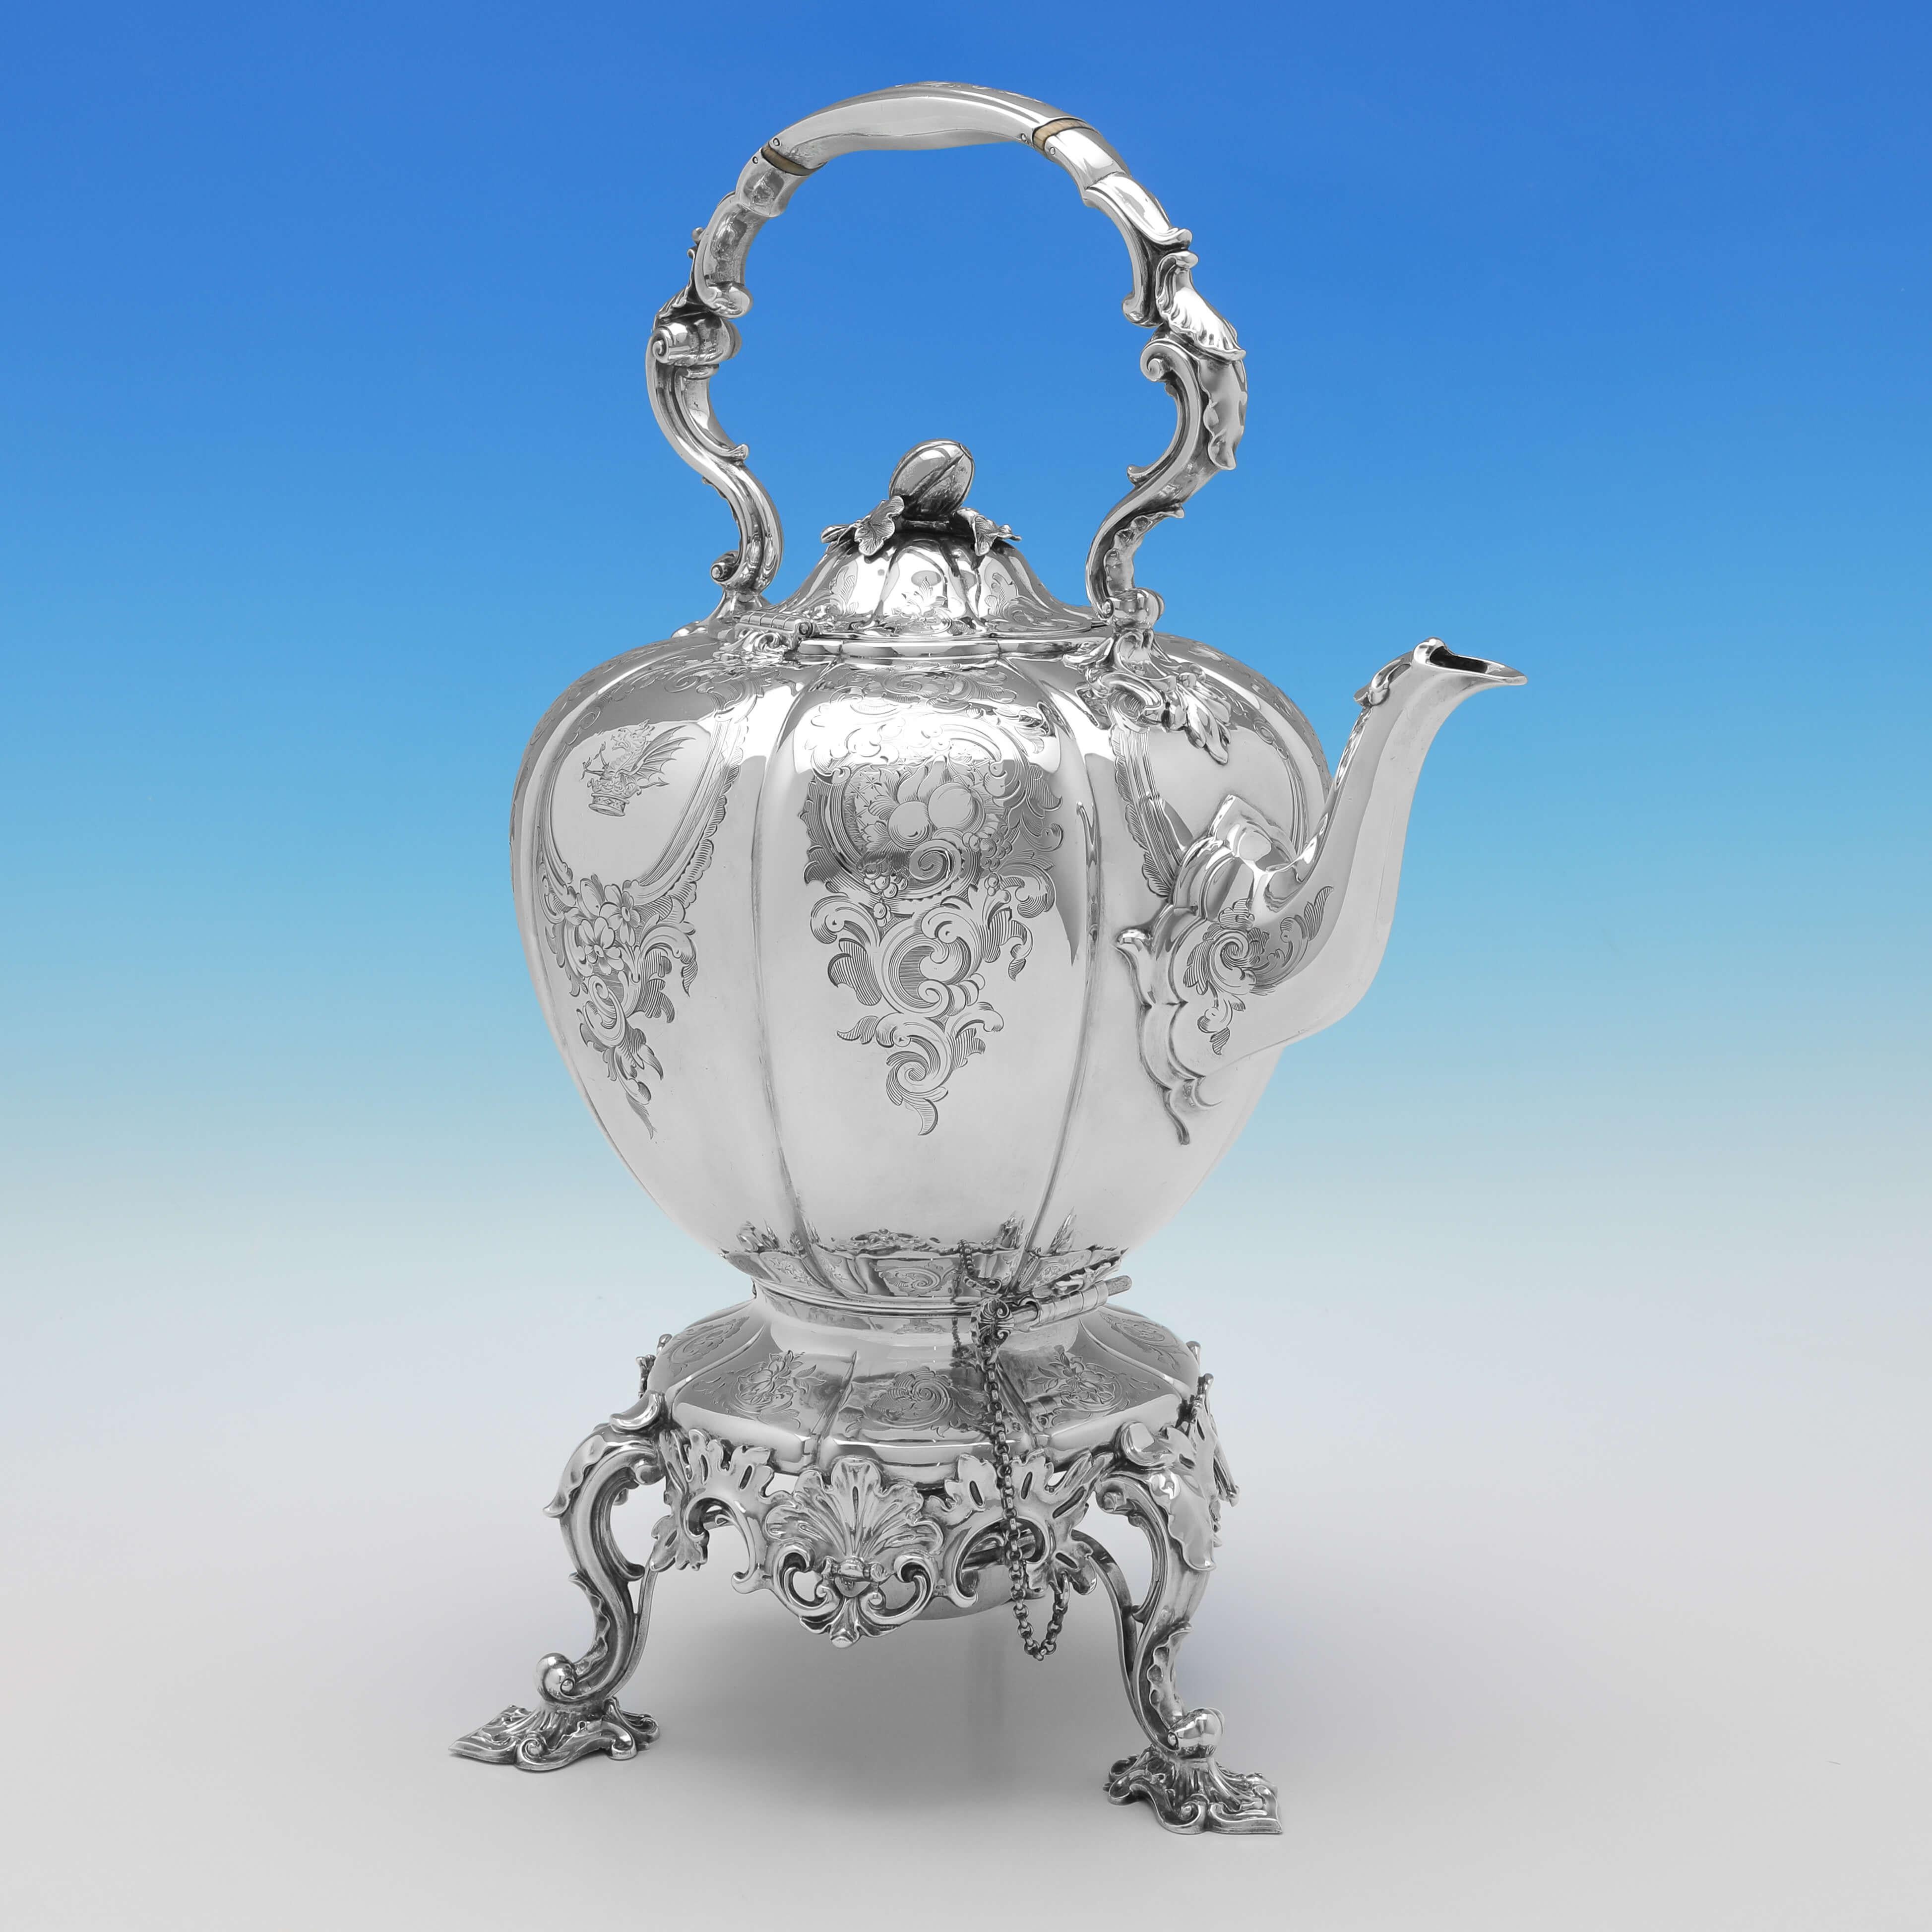 Hallmarked in London in 1855 by Barnards, this attractive and wonderfully engraved, Victorian Antique Sterling Silver Kettle, stands on a hinged stand with a fitted burner underneath. 

The kettle on stand measures 17